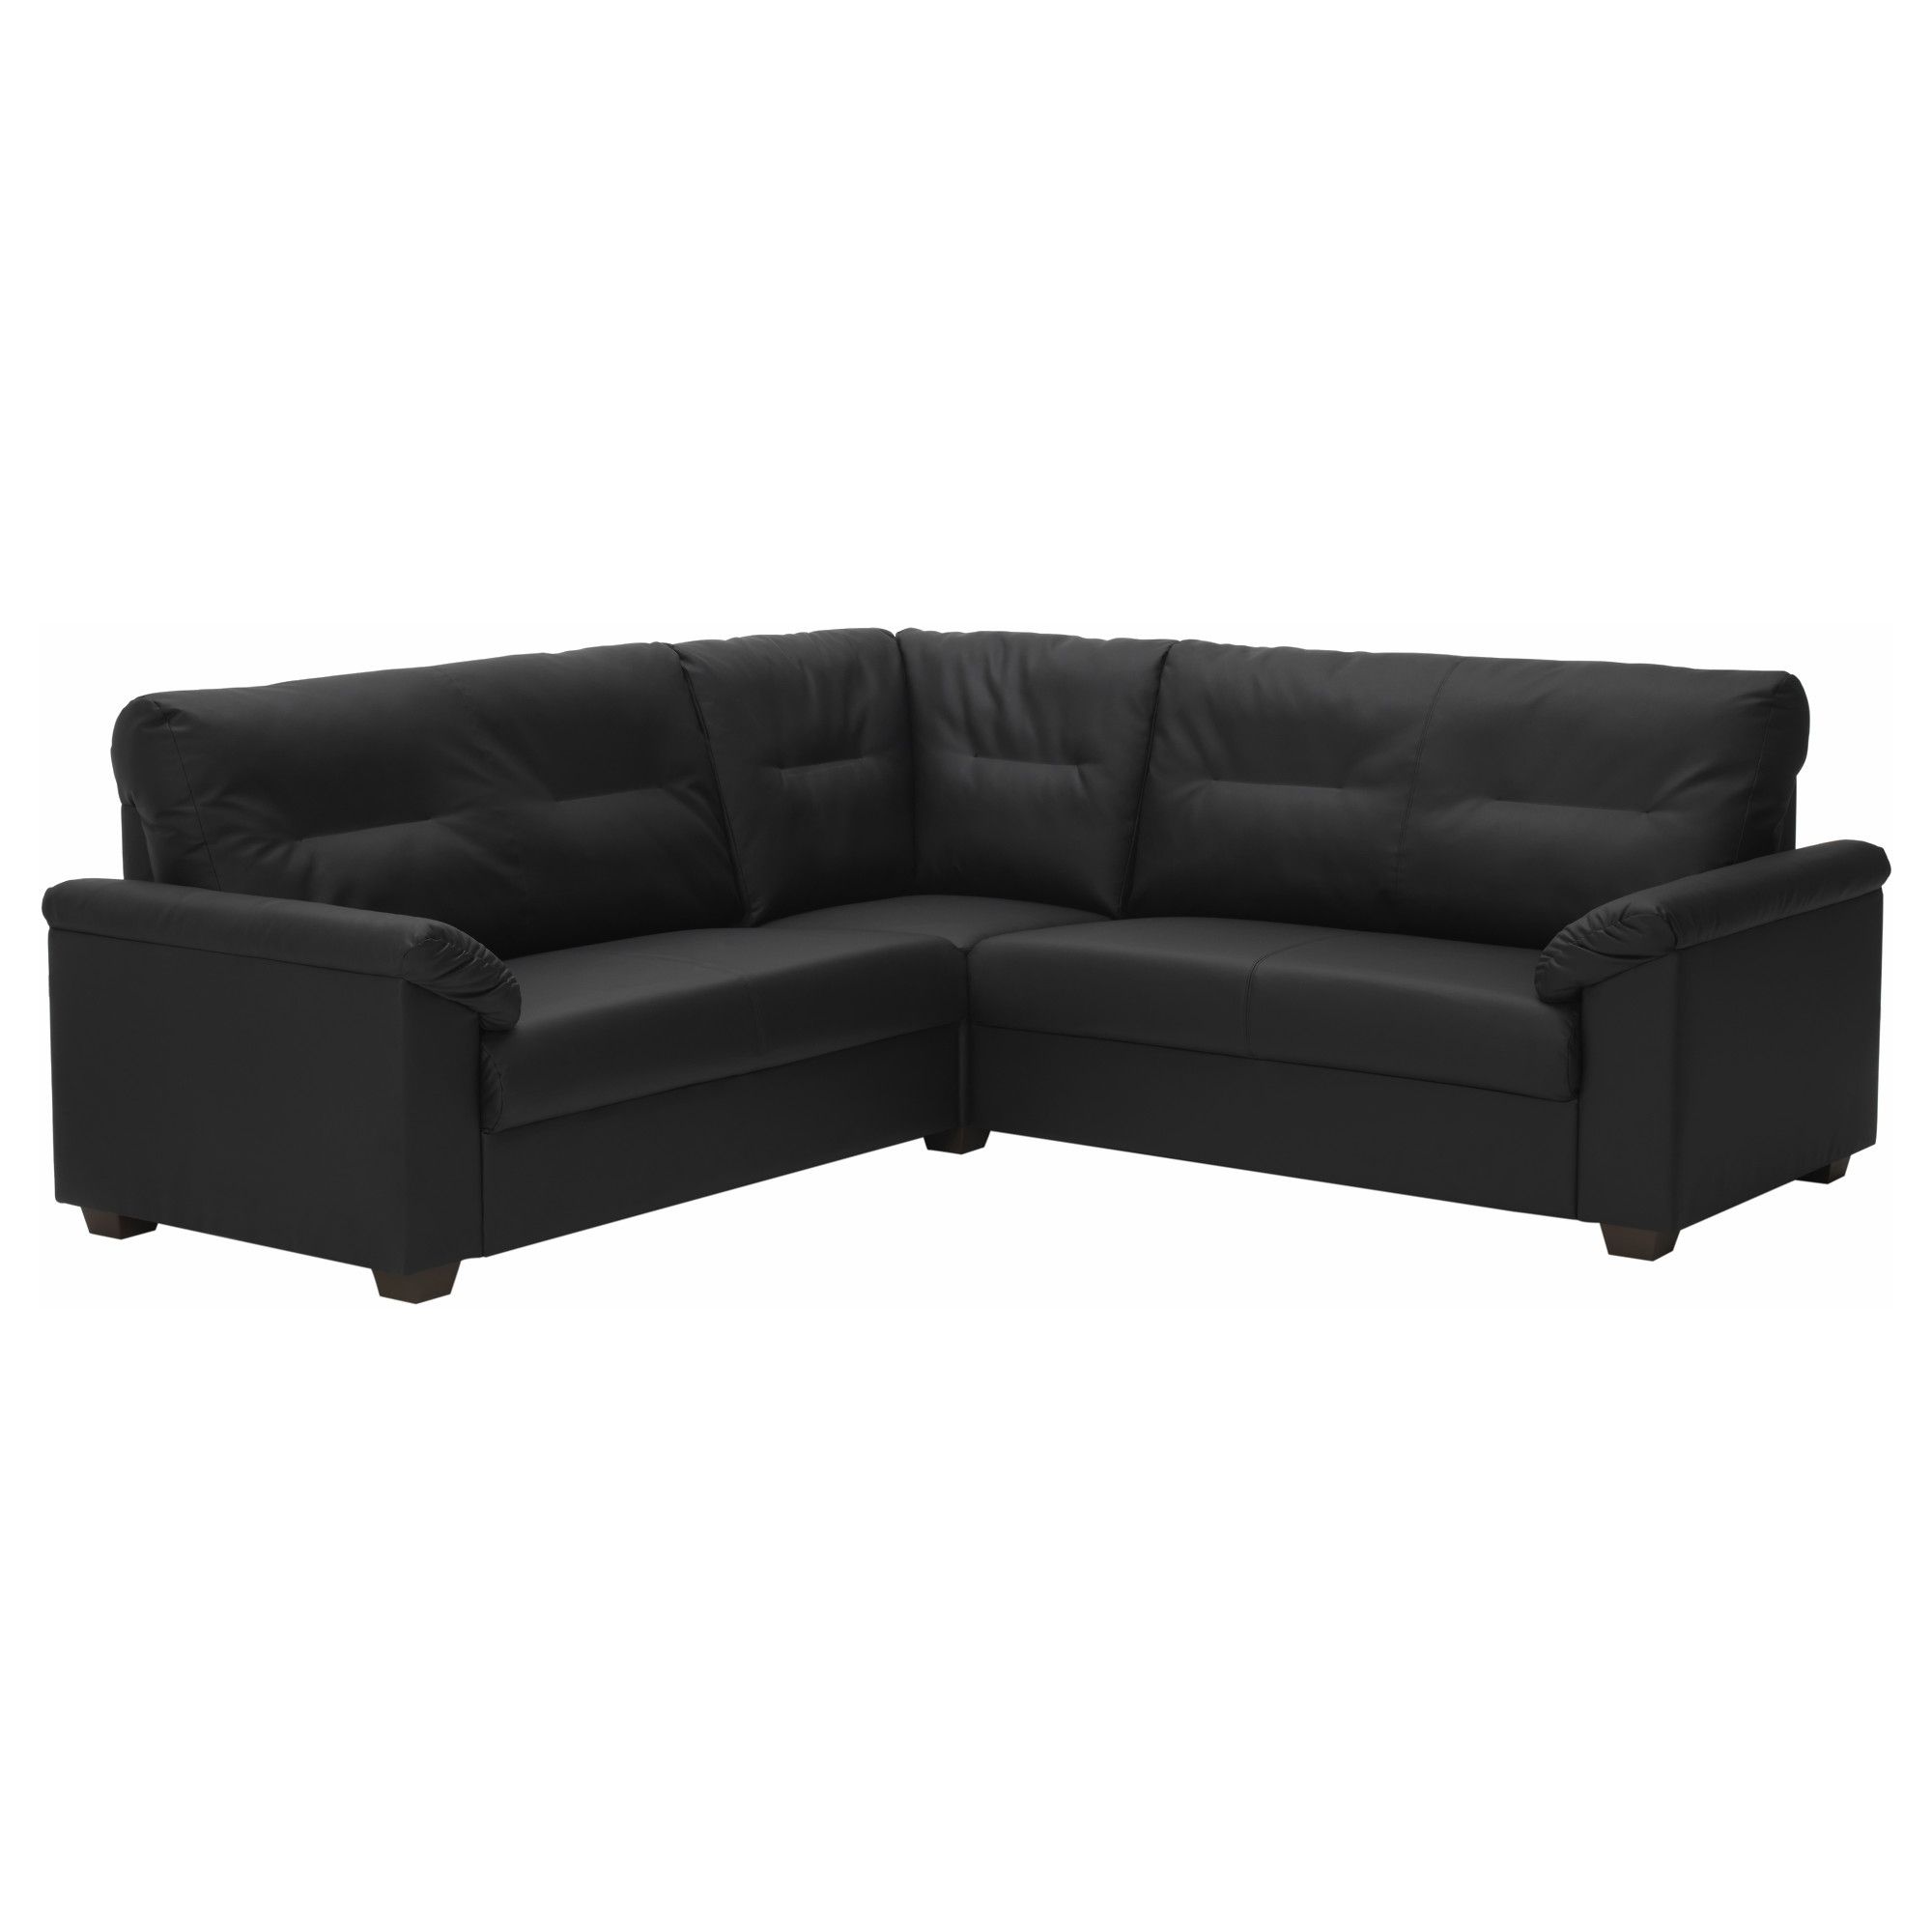 Leather Faux Leather Couches Chairs Ottomans Ikea Intended For Compact Sectional Sofas (View 9 of 12)